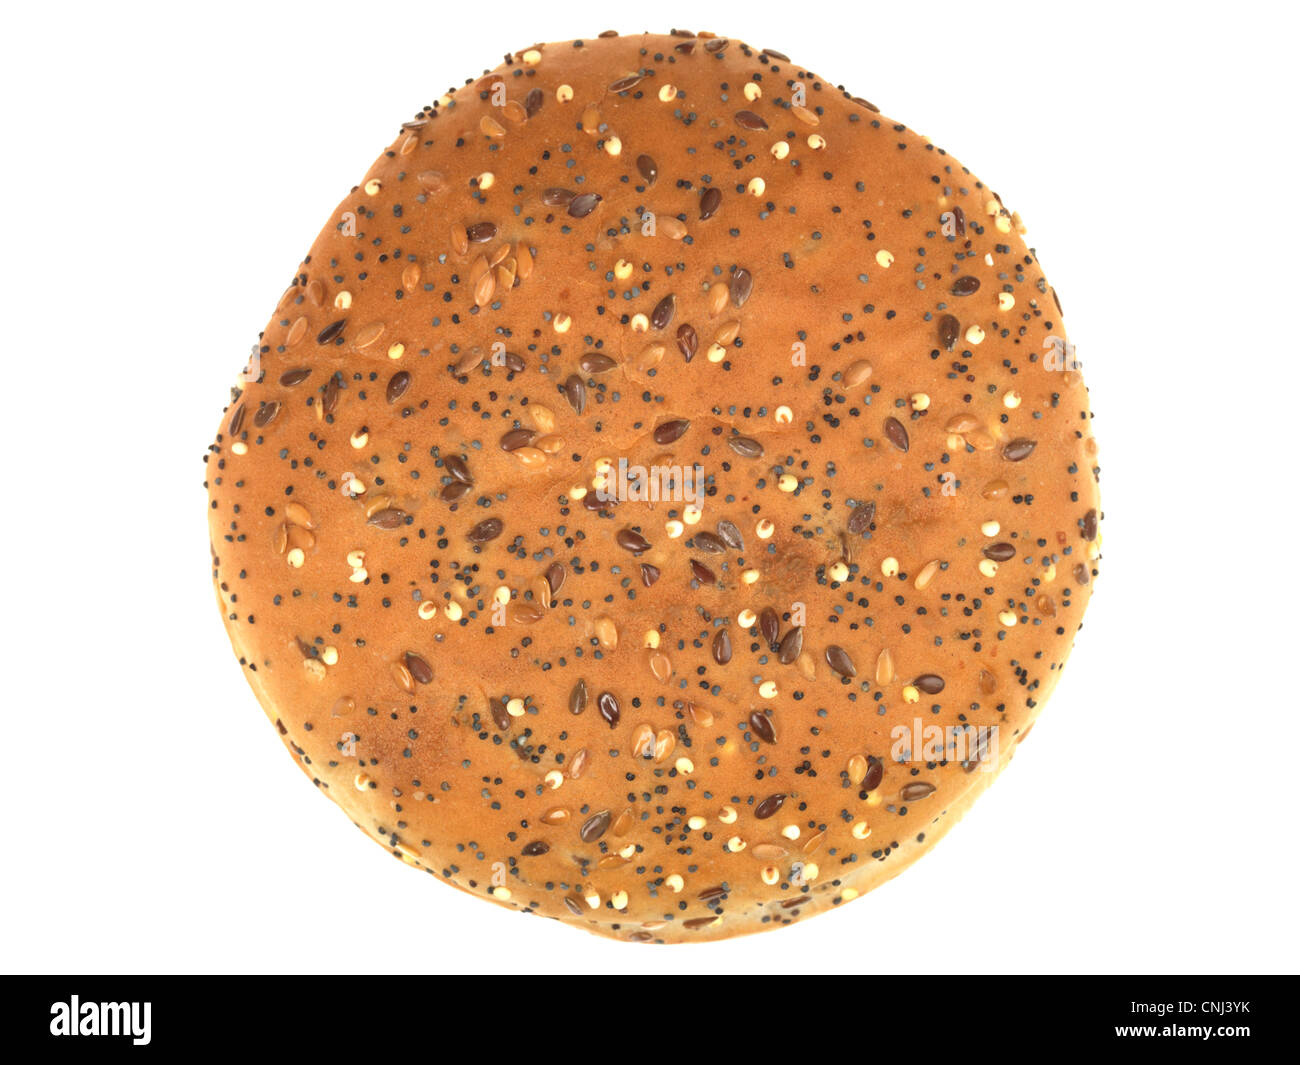 Seeded Brown Bread Roll Stock Photo